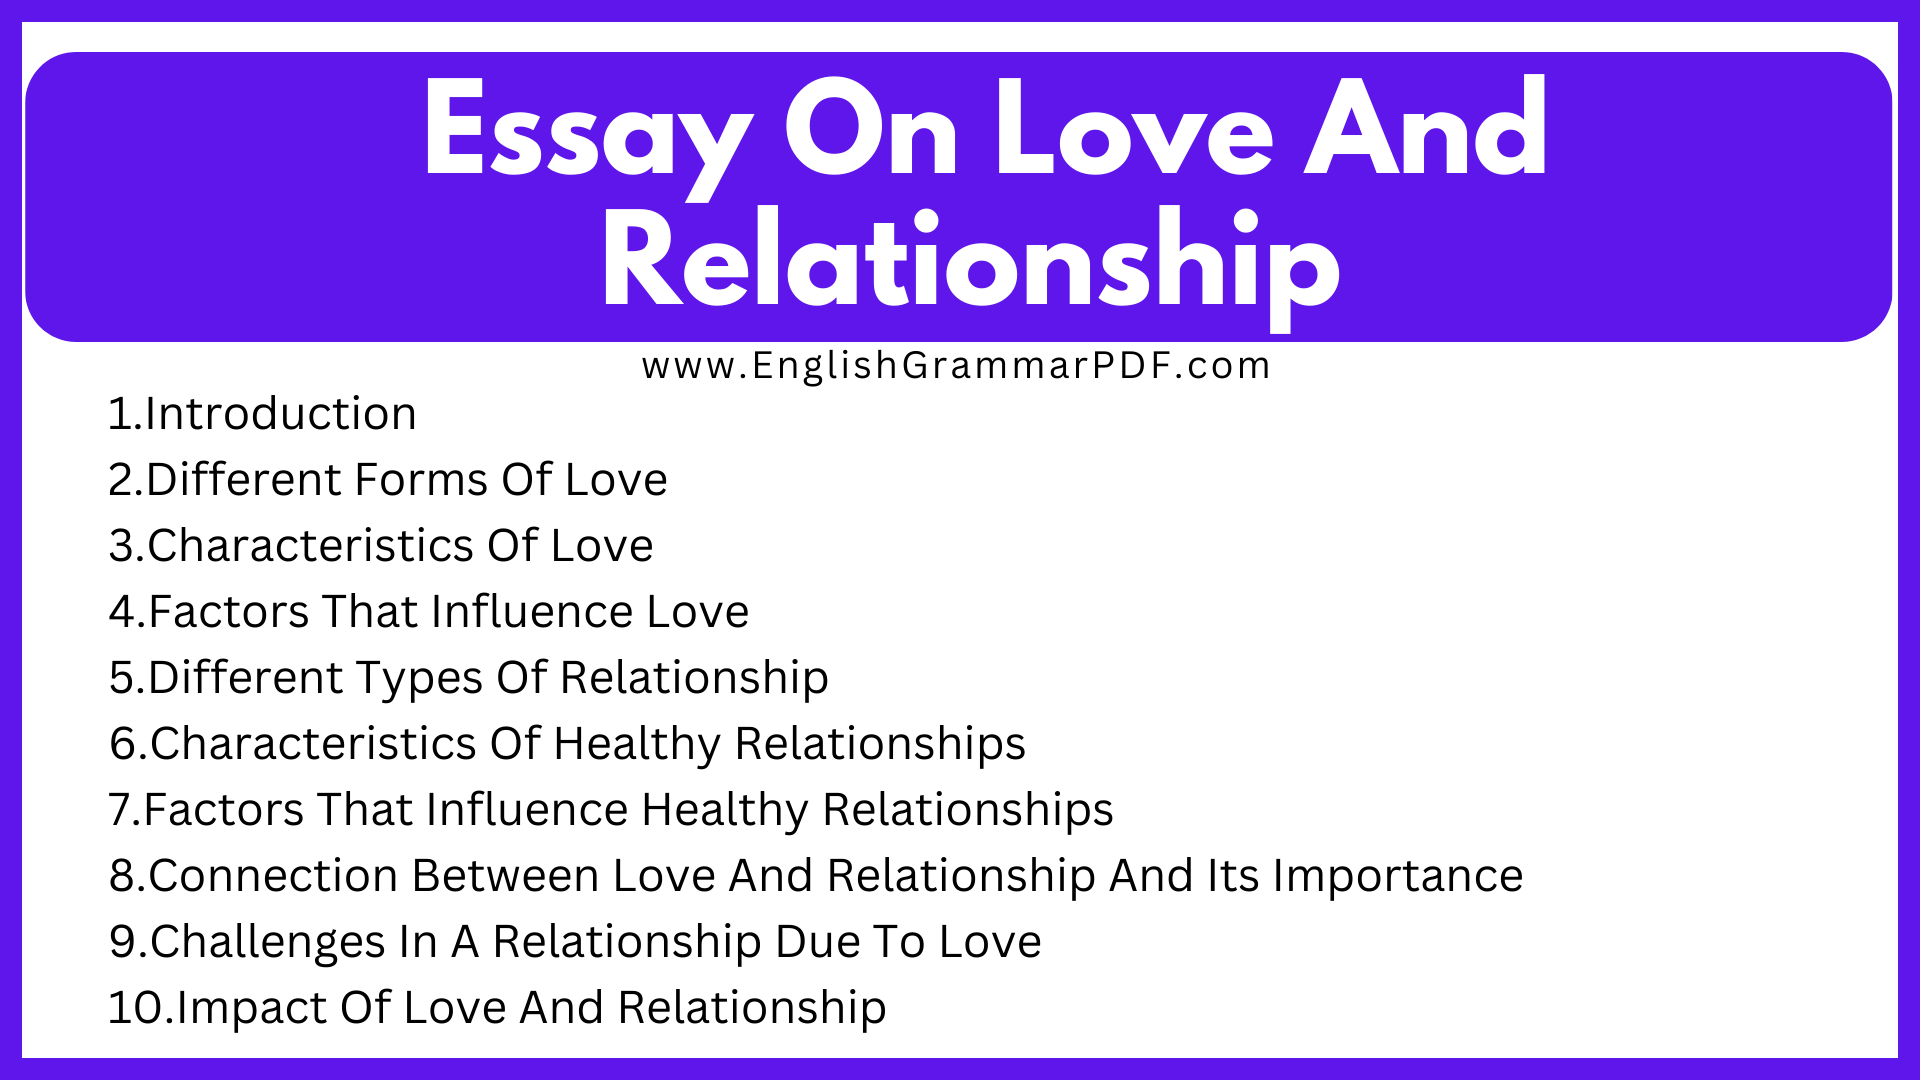 Essay On Love And Relationship